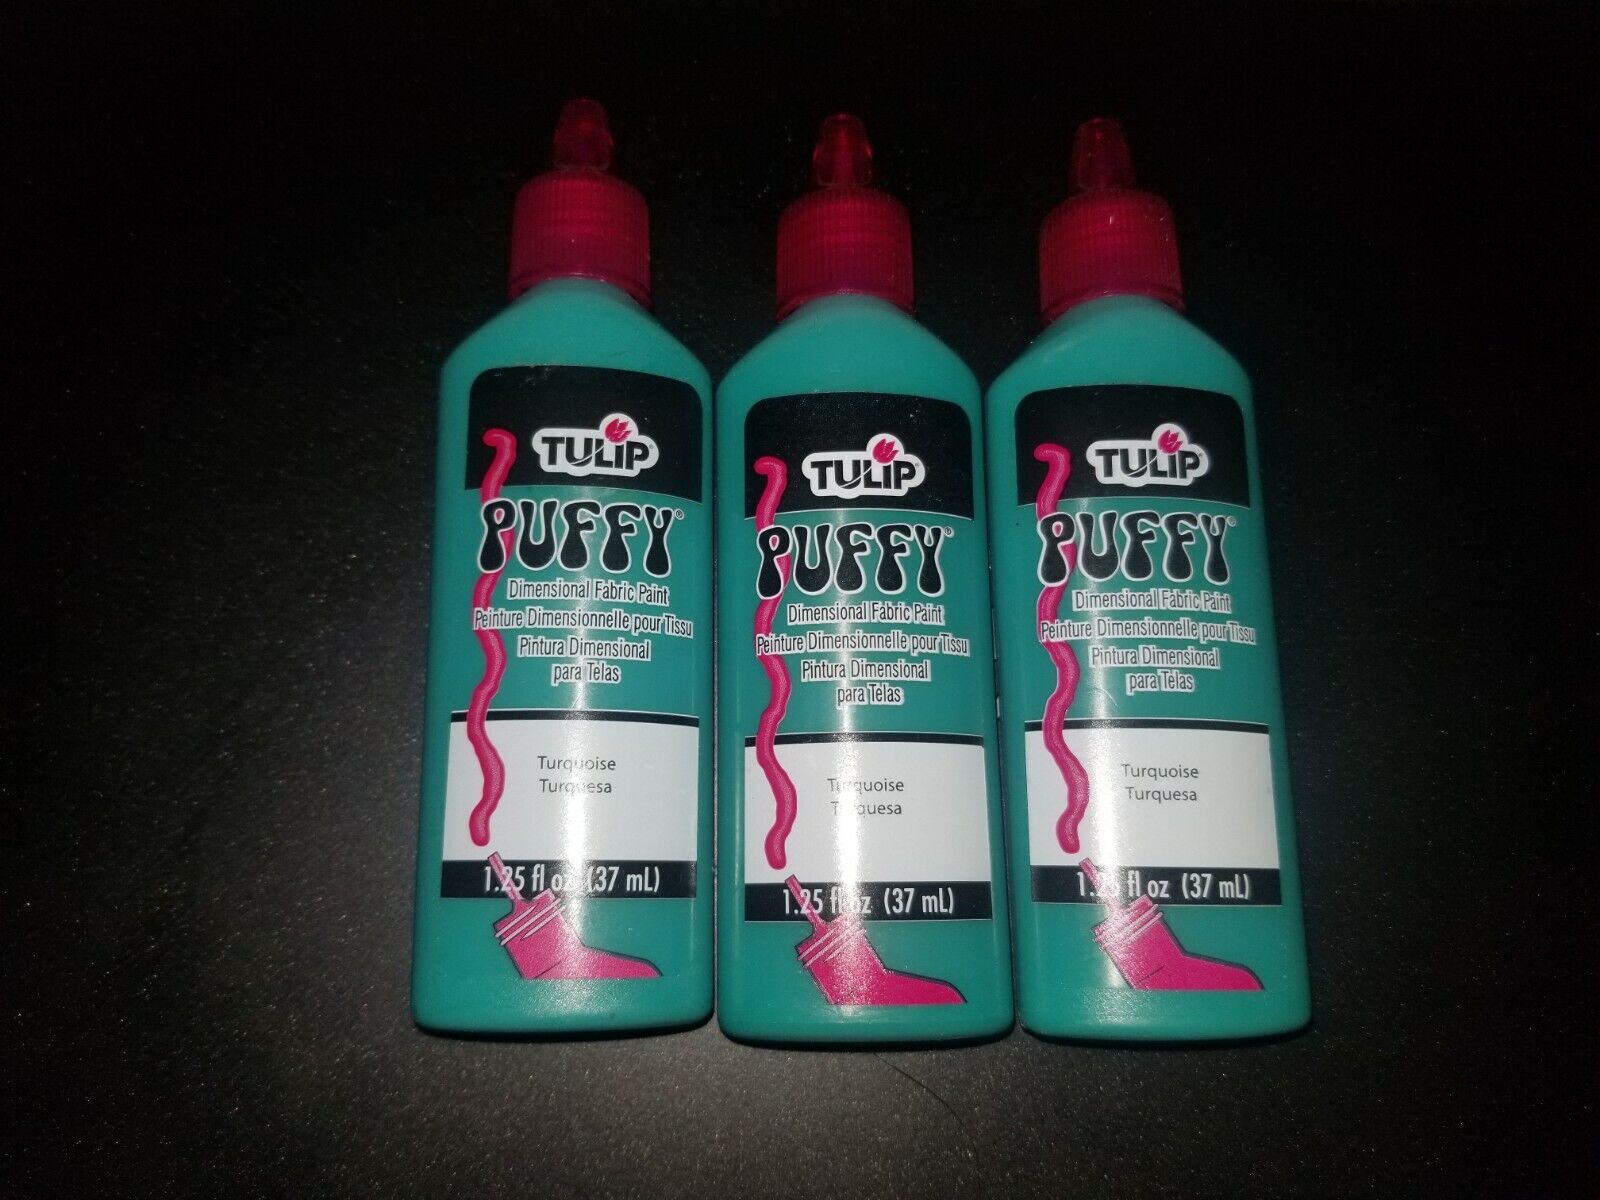 3 bottles of 1.25 oz Tulip Puffy Paint in Turquoise New!